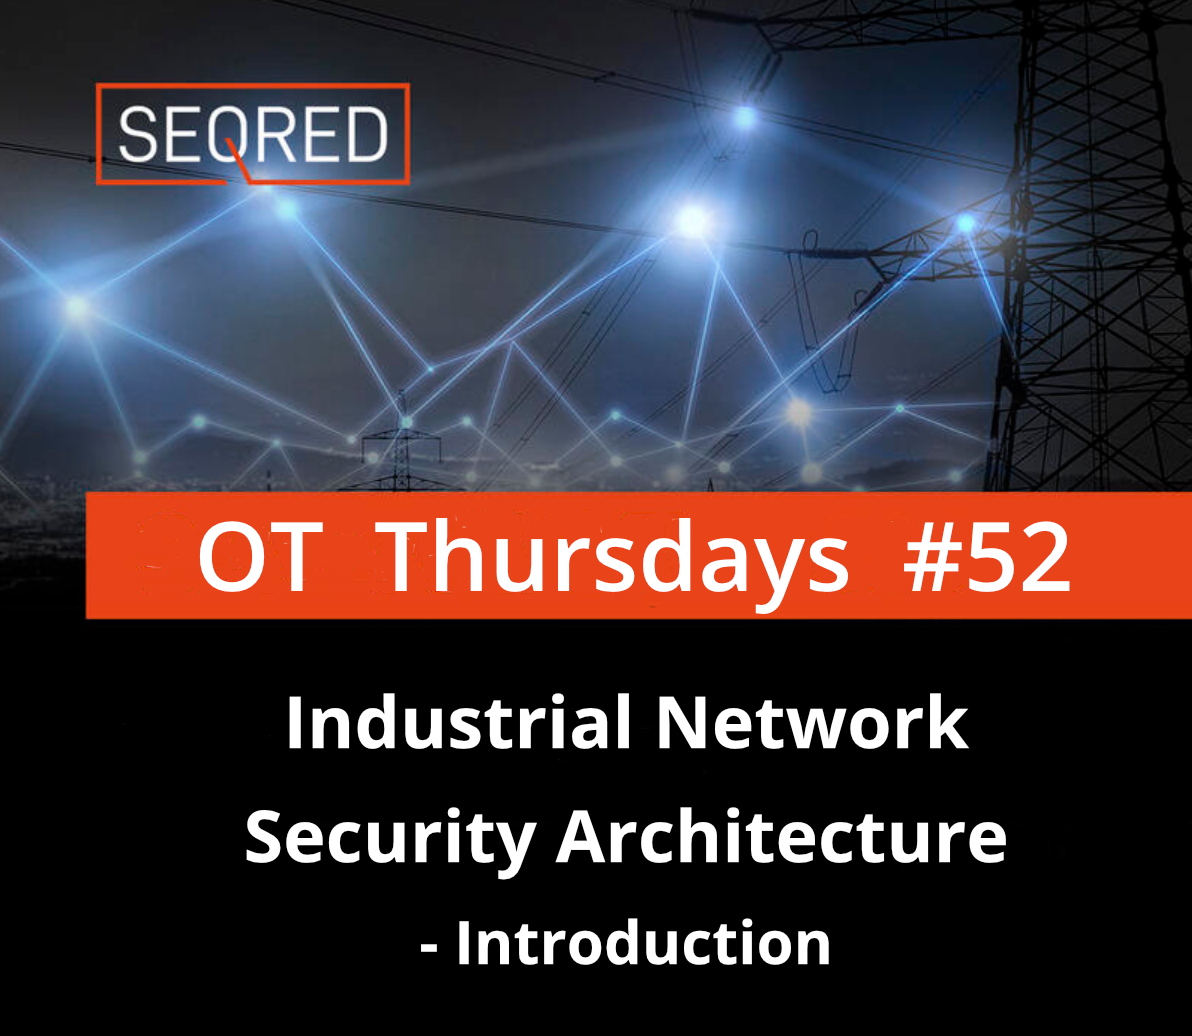 Industrial Network Security Architecture - Introduction